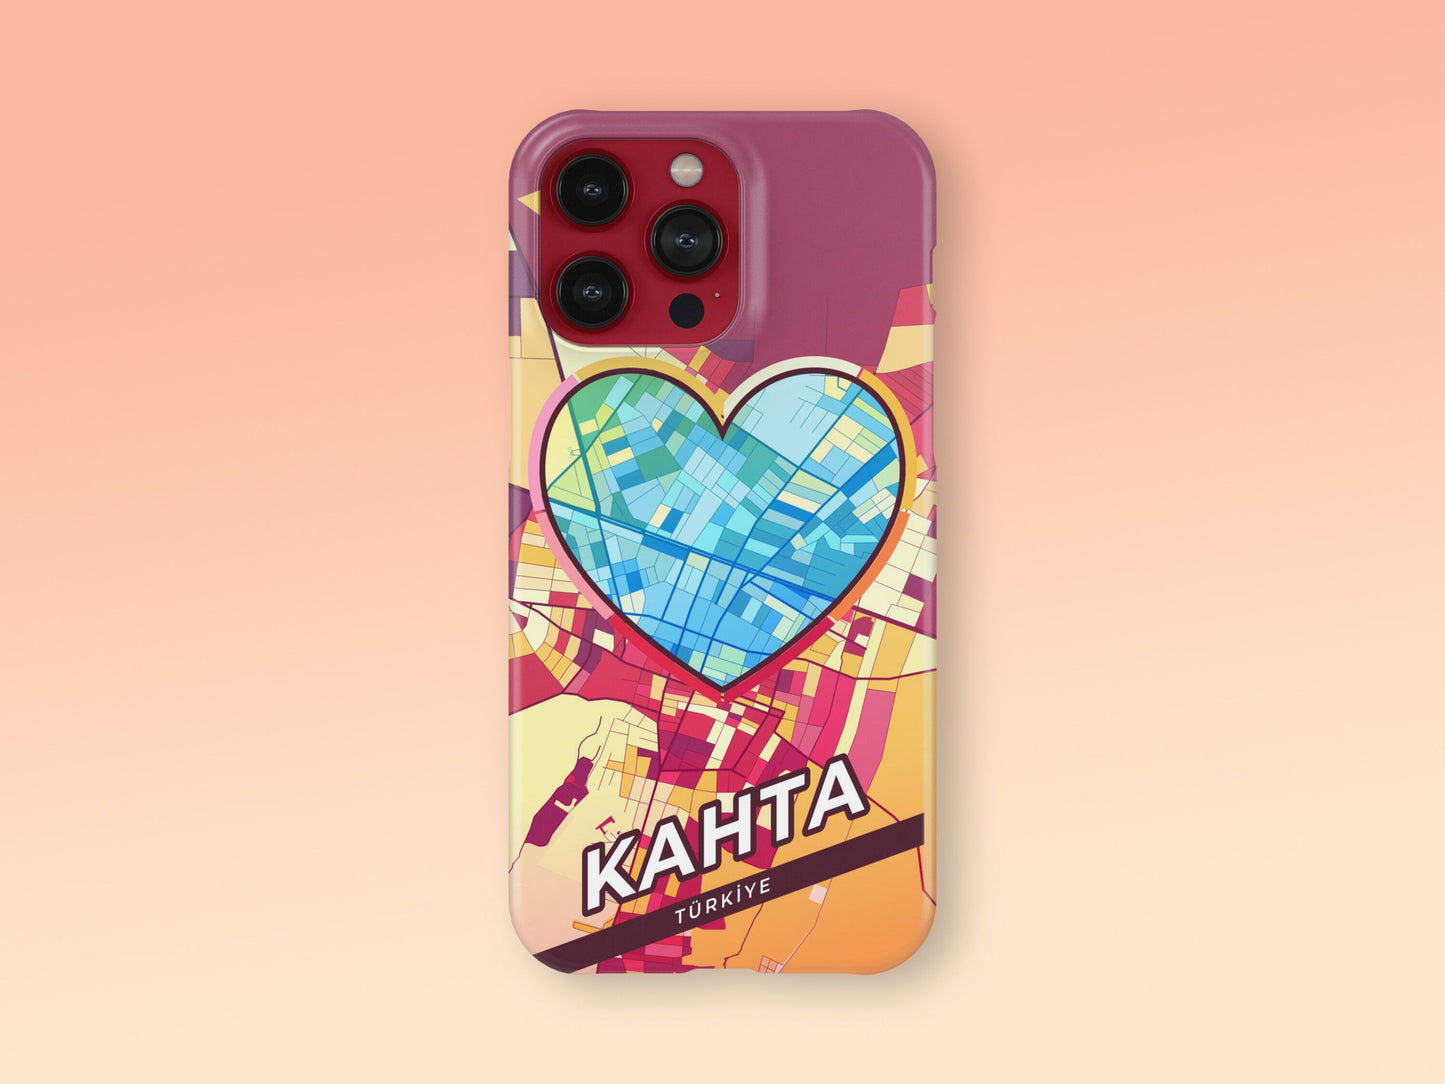 Kahta Turkey slim phone case with colorful icon. Birthday, wedding or housewarming gift. Couple match cases. 2